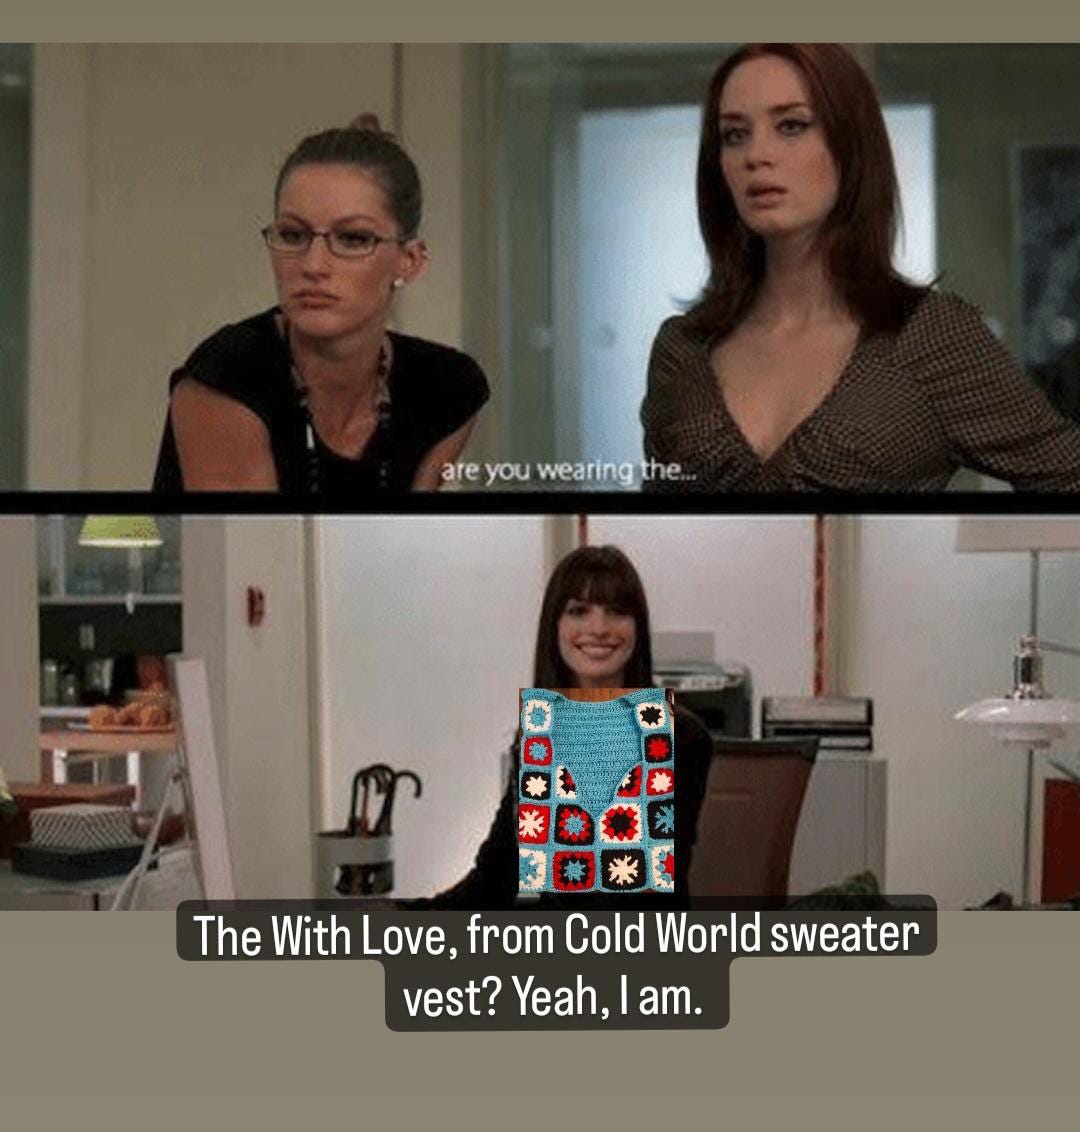 Devil Wears Prada meme where Emily Blunt is like "are you wearing the..." and then Anne Hathaway has the Cold World sweater vest on and says "the With Love, from Cold World sweater vest? yeah, I am"